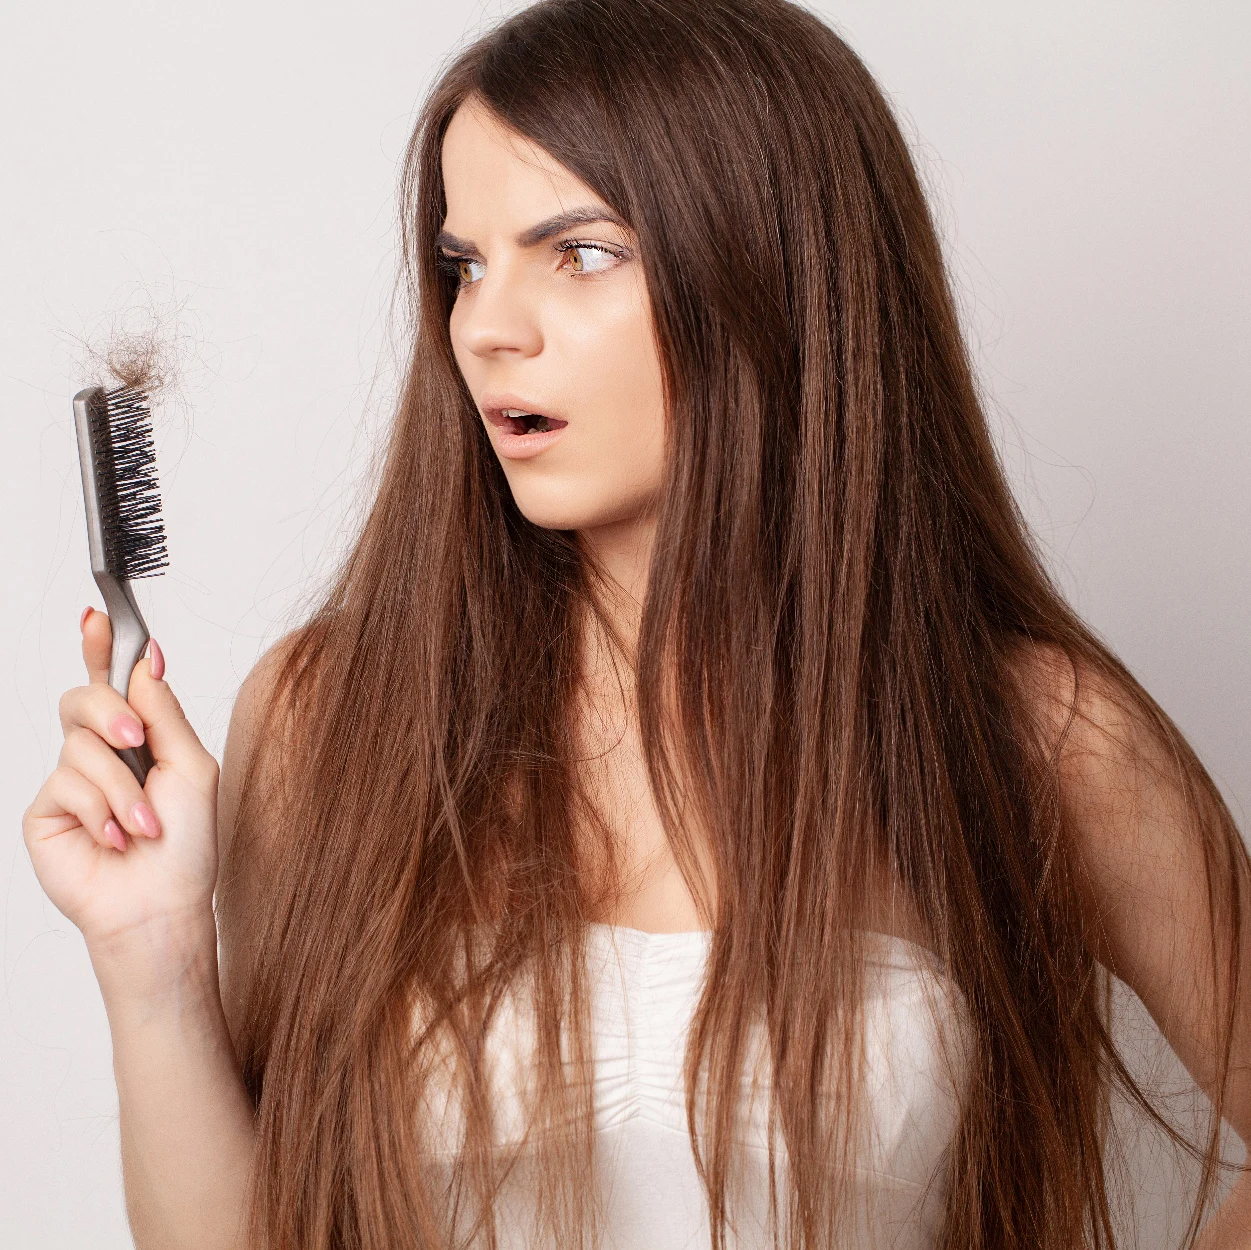 Hair Fall Women Check Up,Blood tests for hair loss in females, Blood test for hair loss cost, Hair loss in women, Vivid Imaging and Diagnostics.